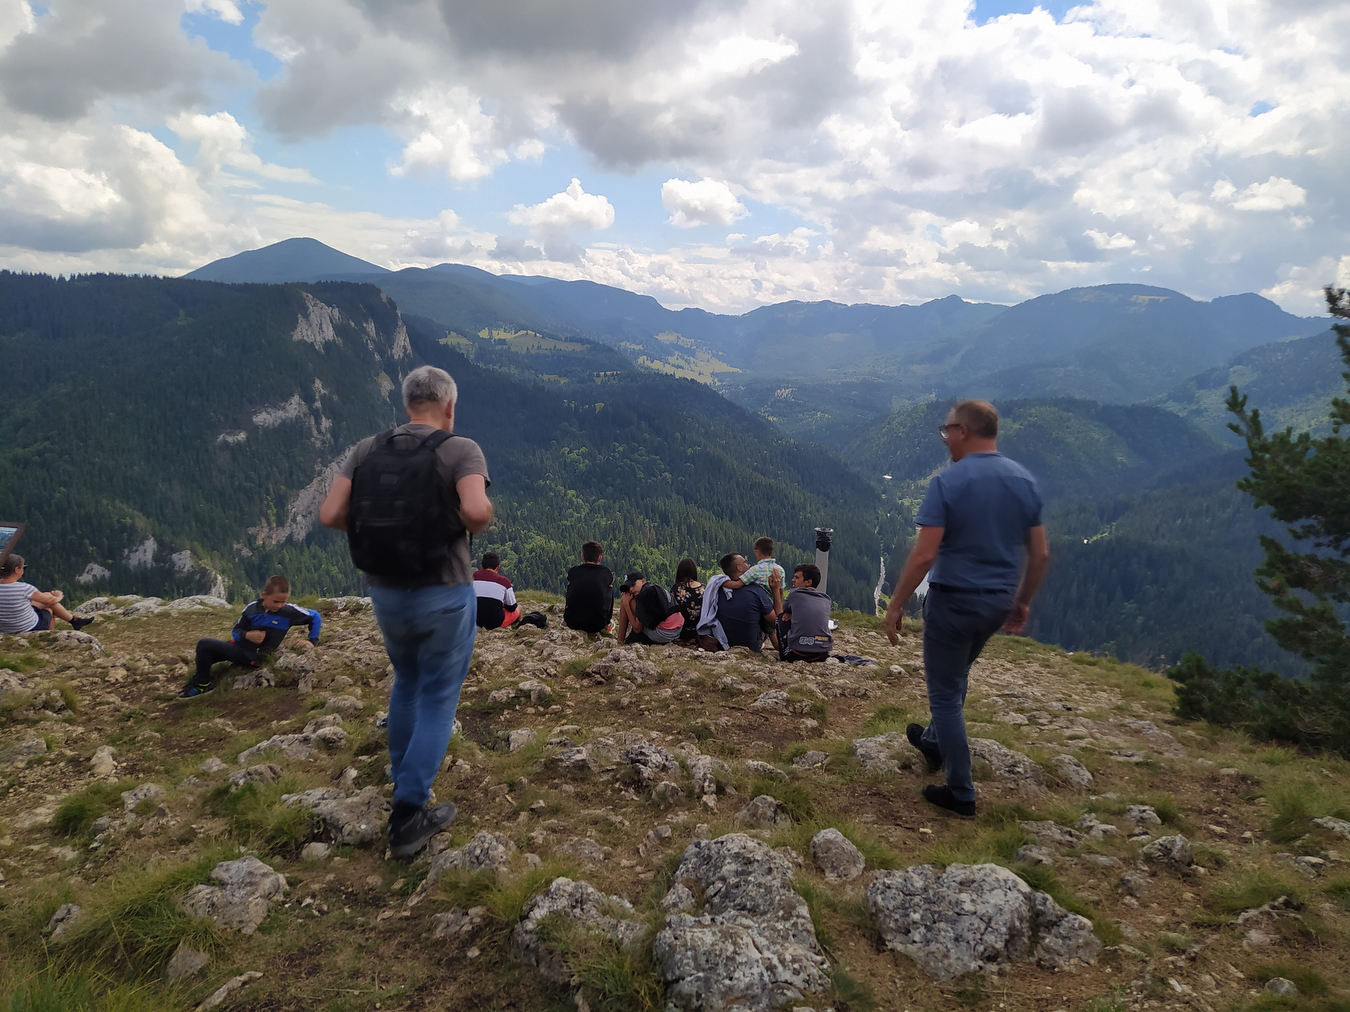 People are hiking during their camping trip in Transylvania.